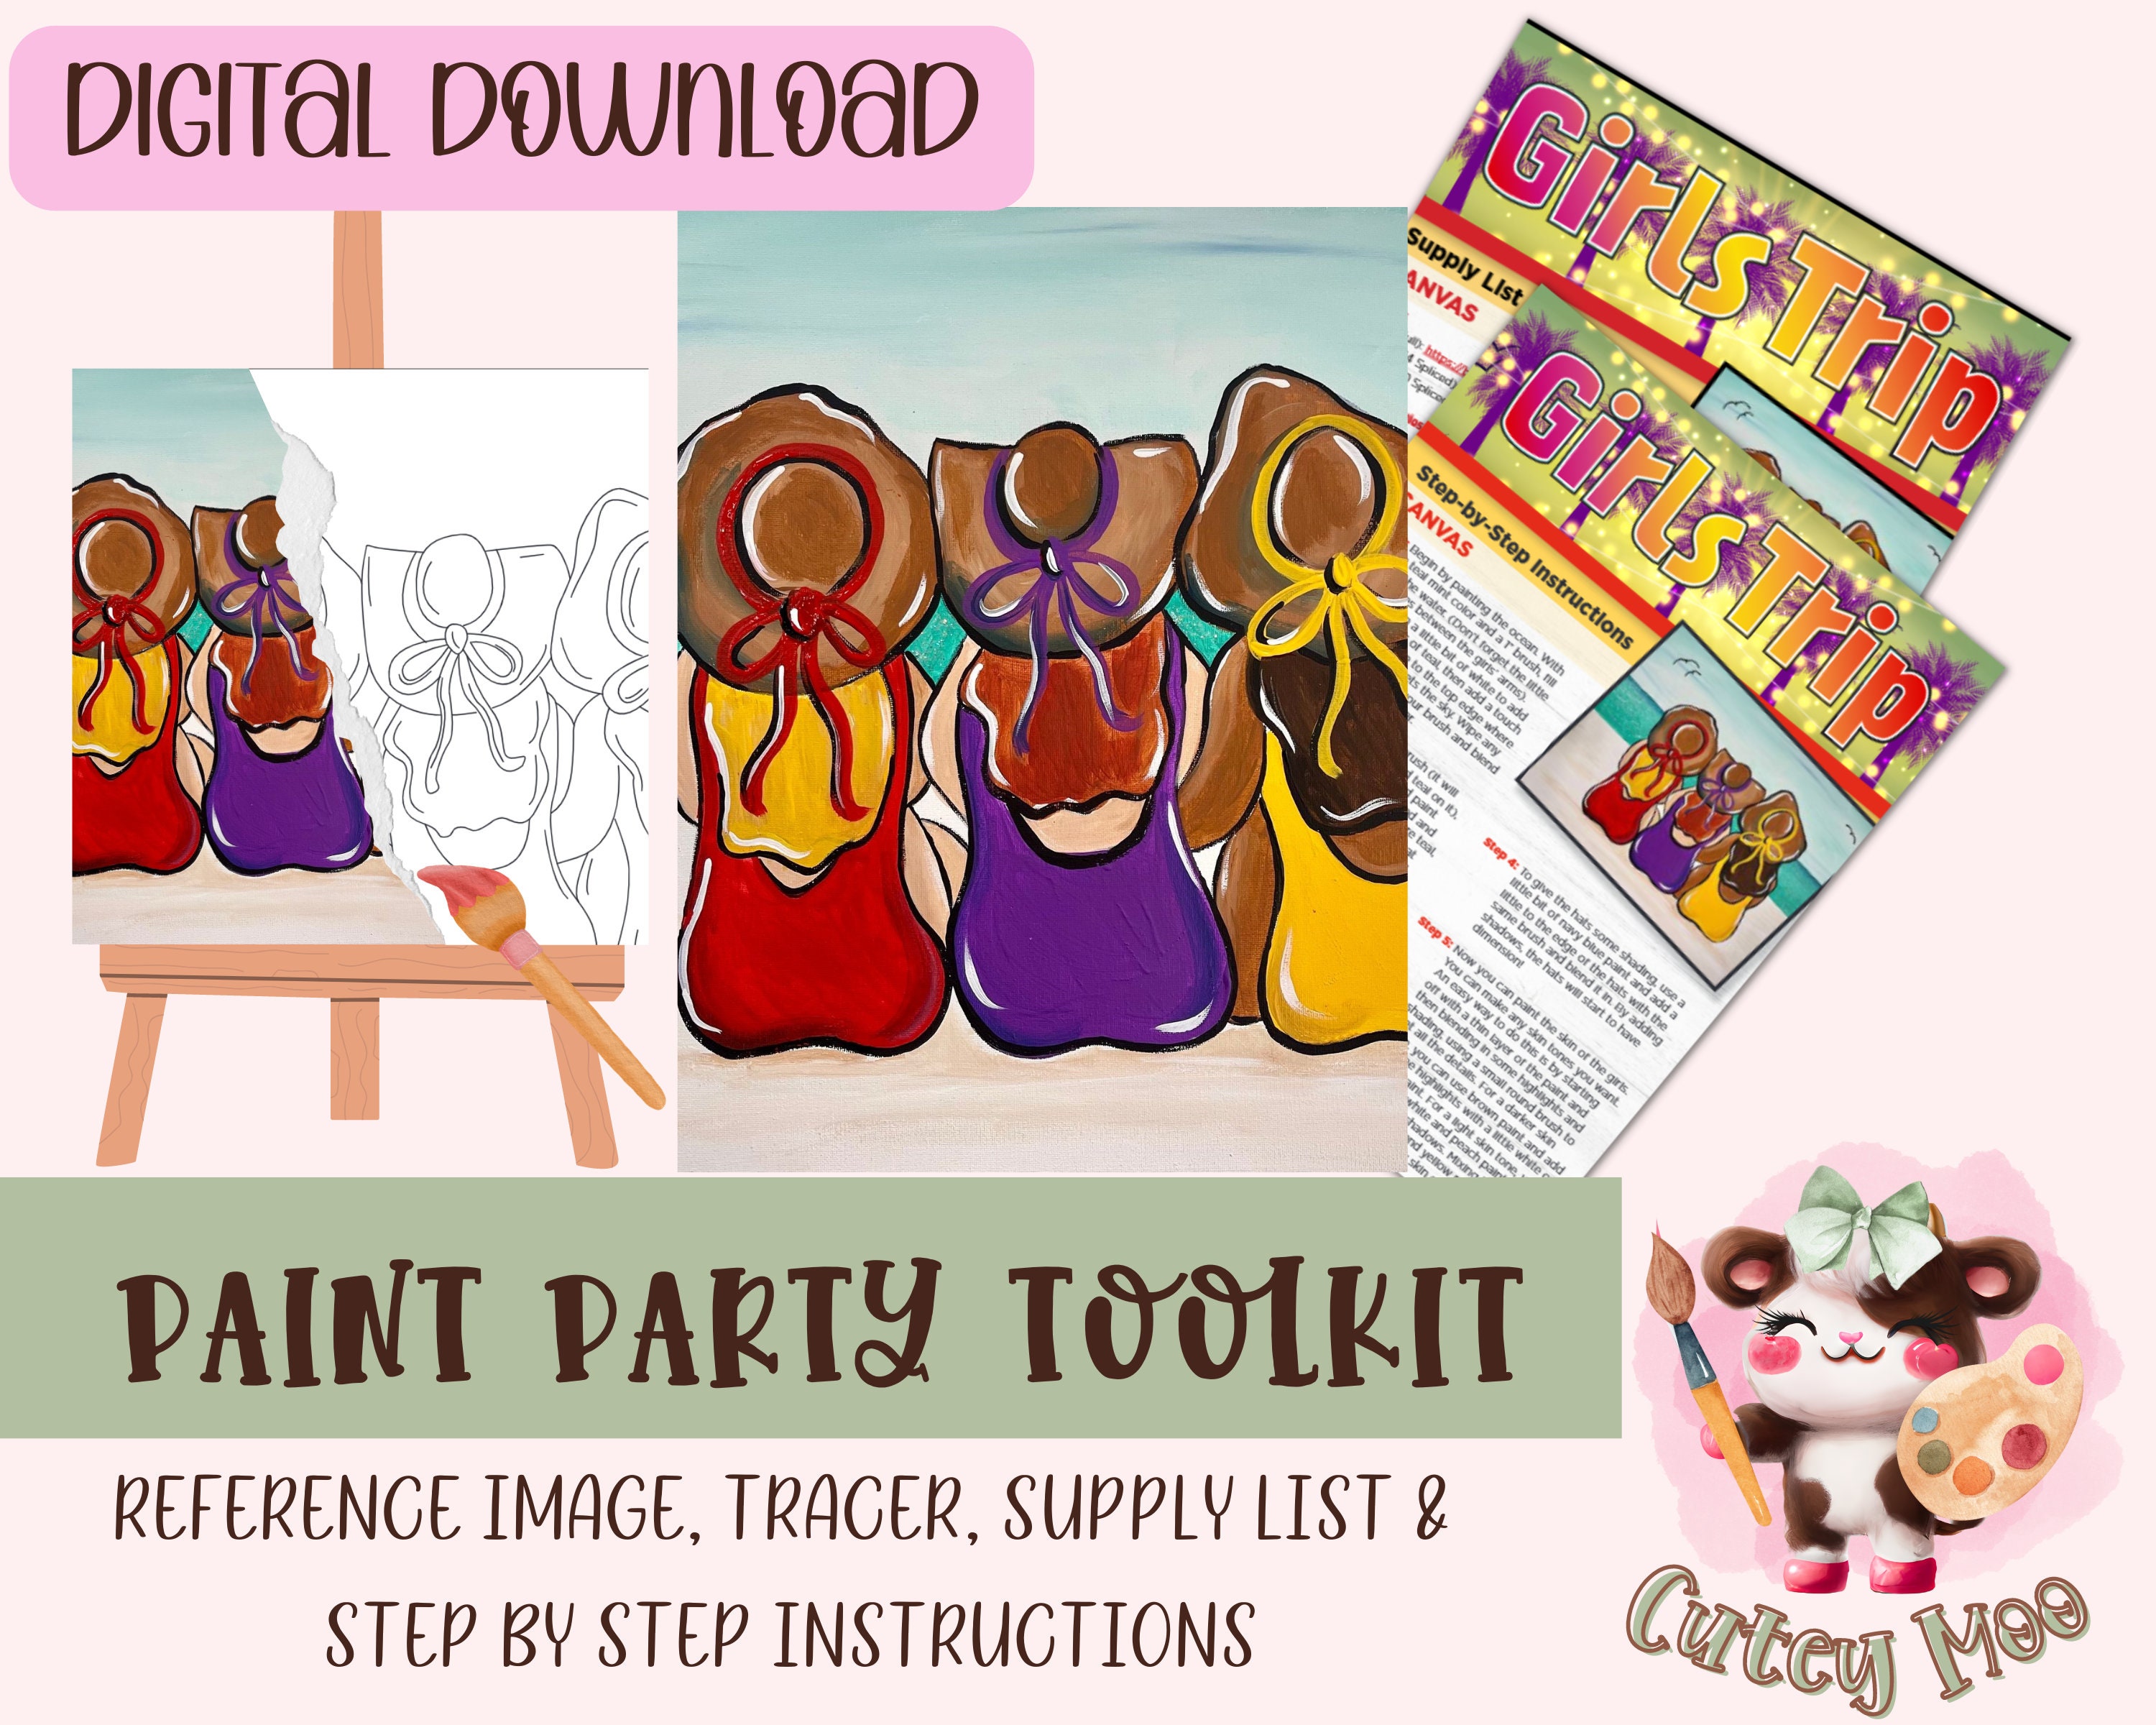 SIP & PAINT KITS for Adults Complete With All Supplies Included 